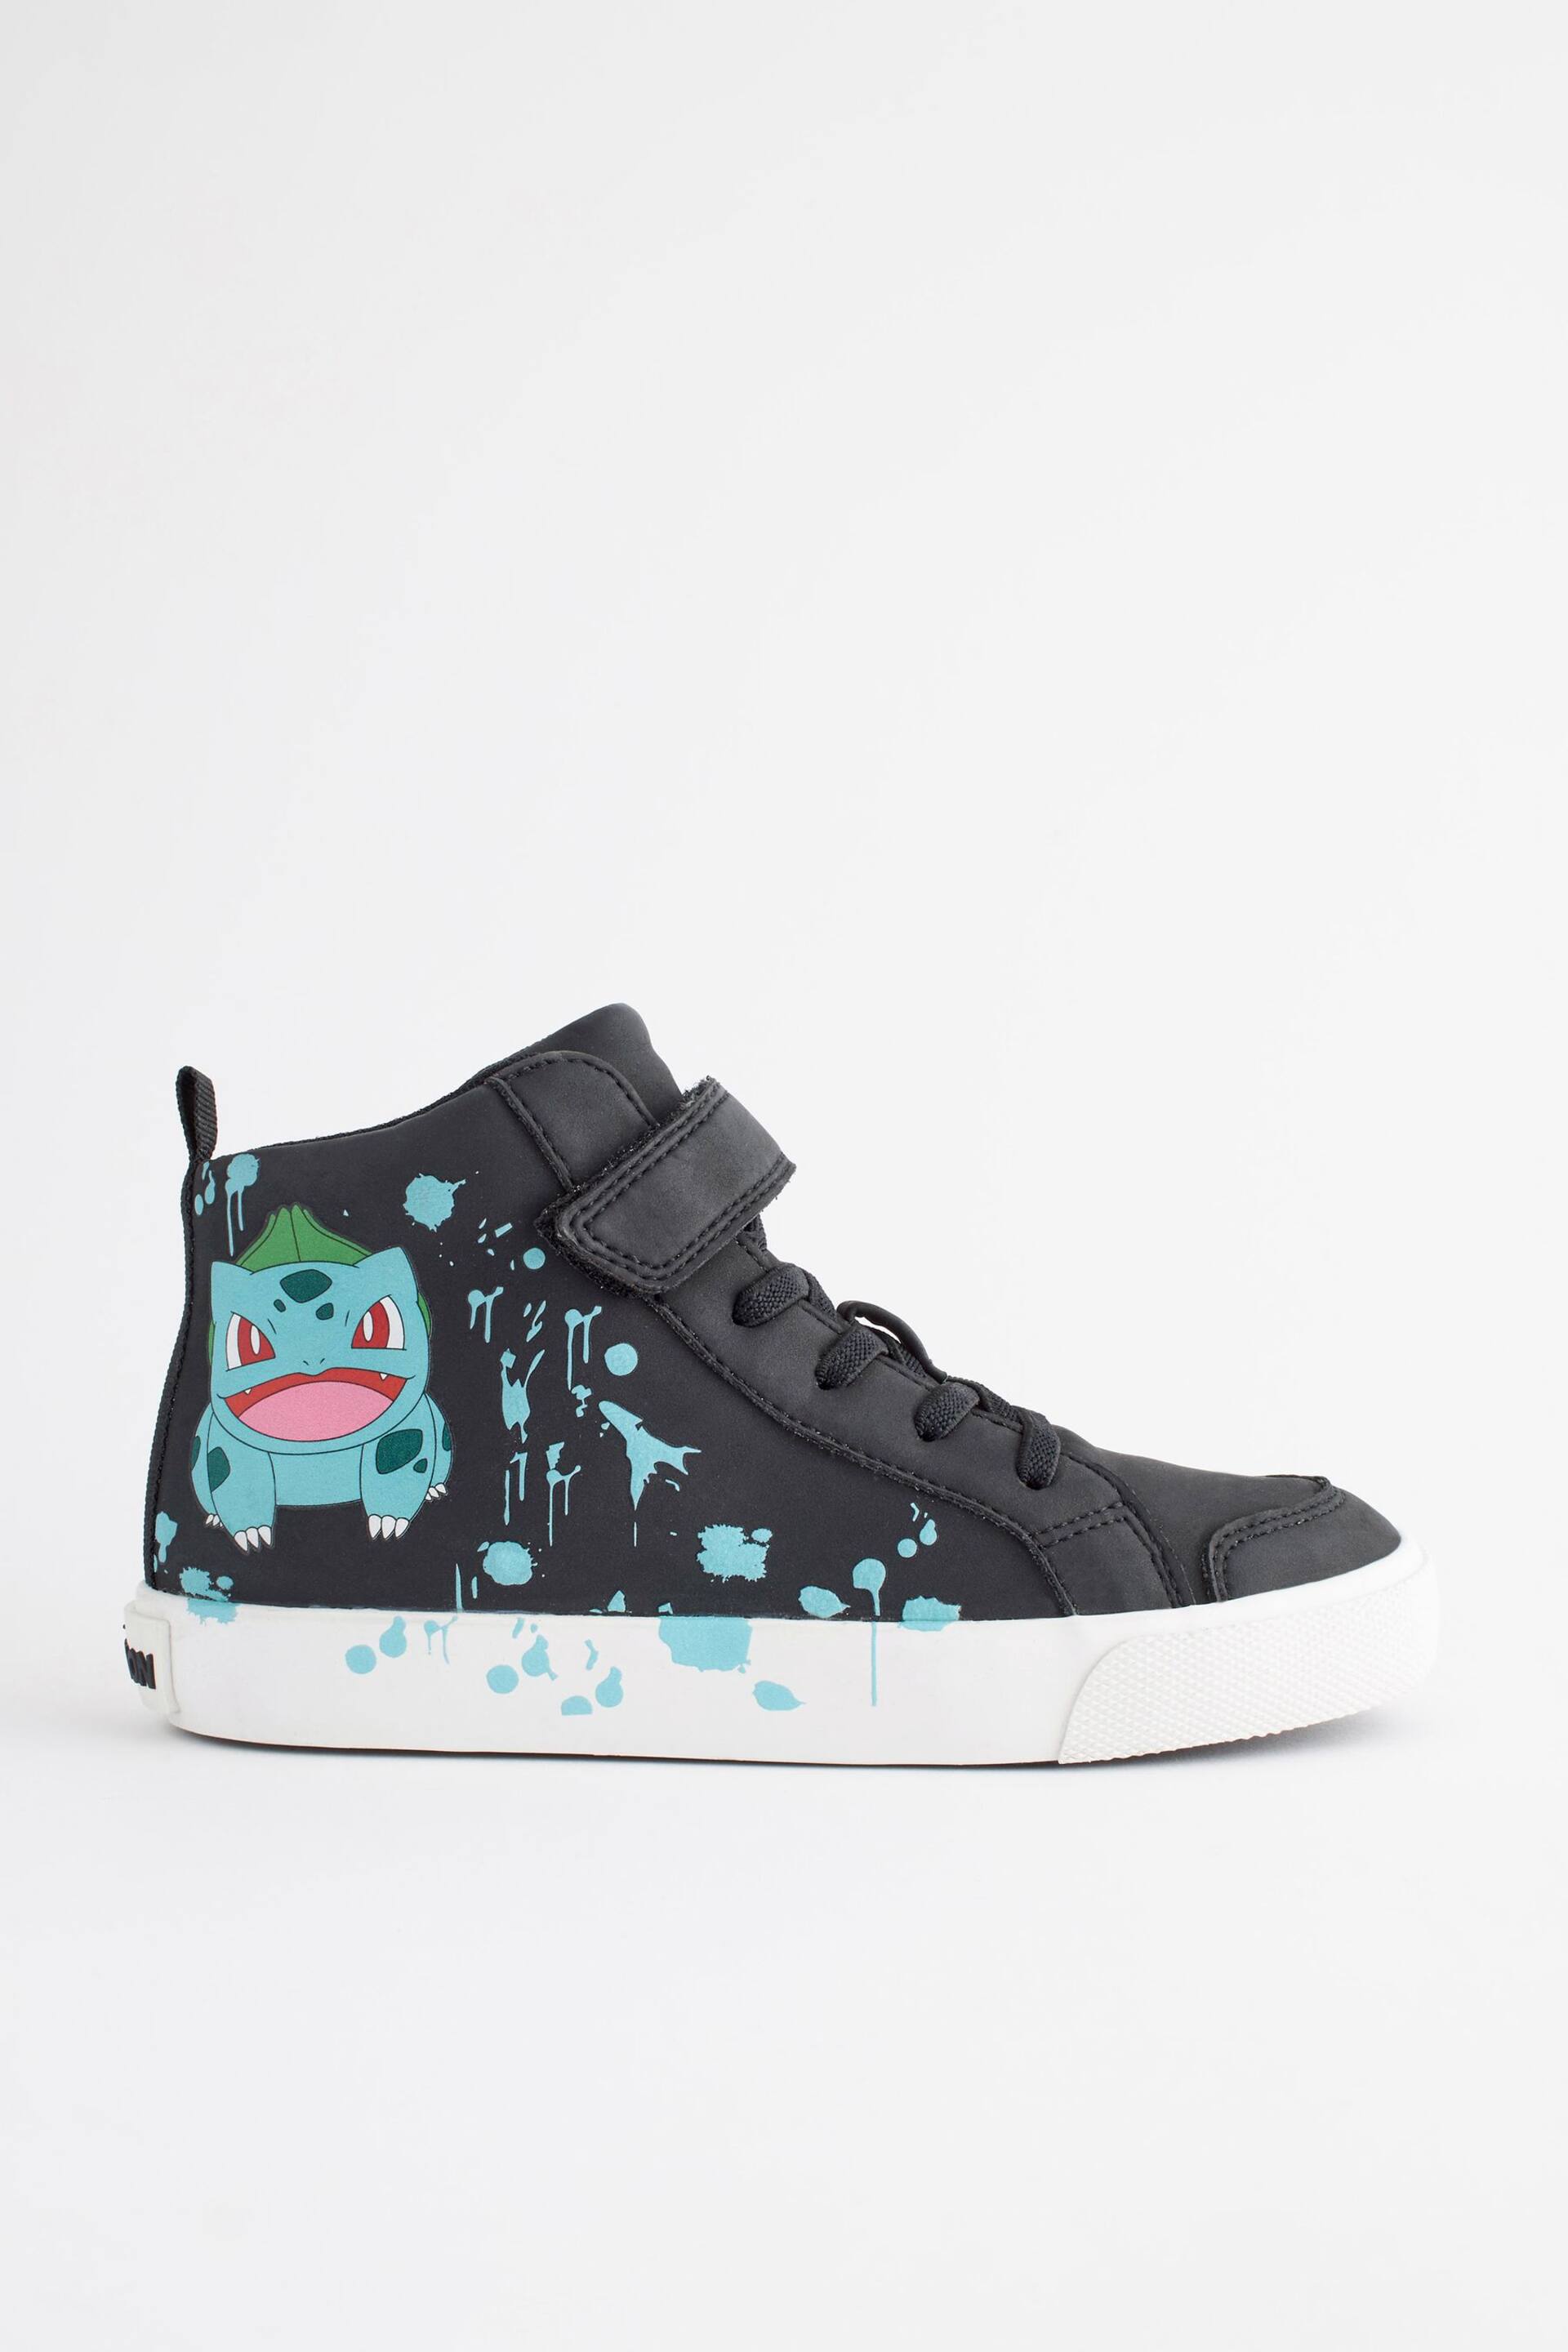 Pokemon Black Elastic Lace High Top Trainers - Image 3 of 6